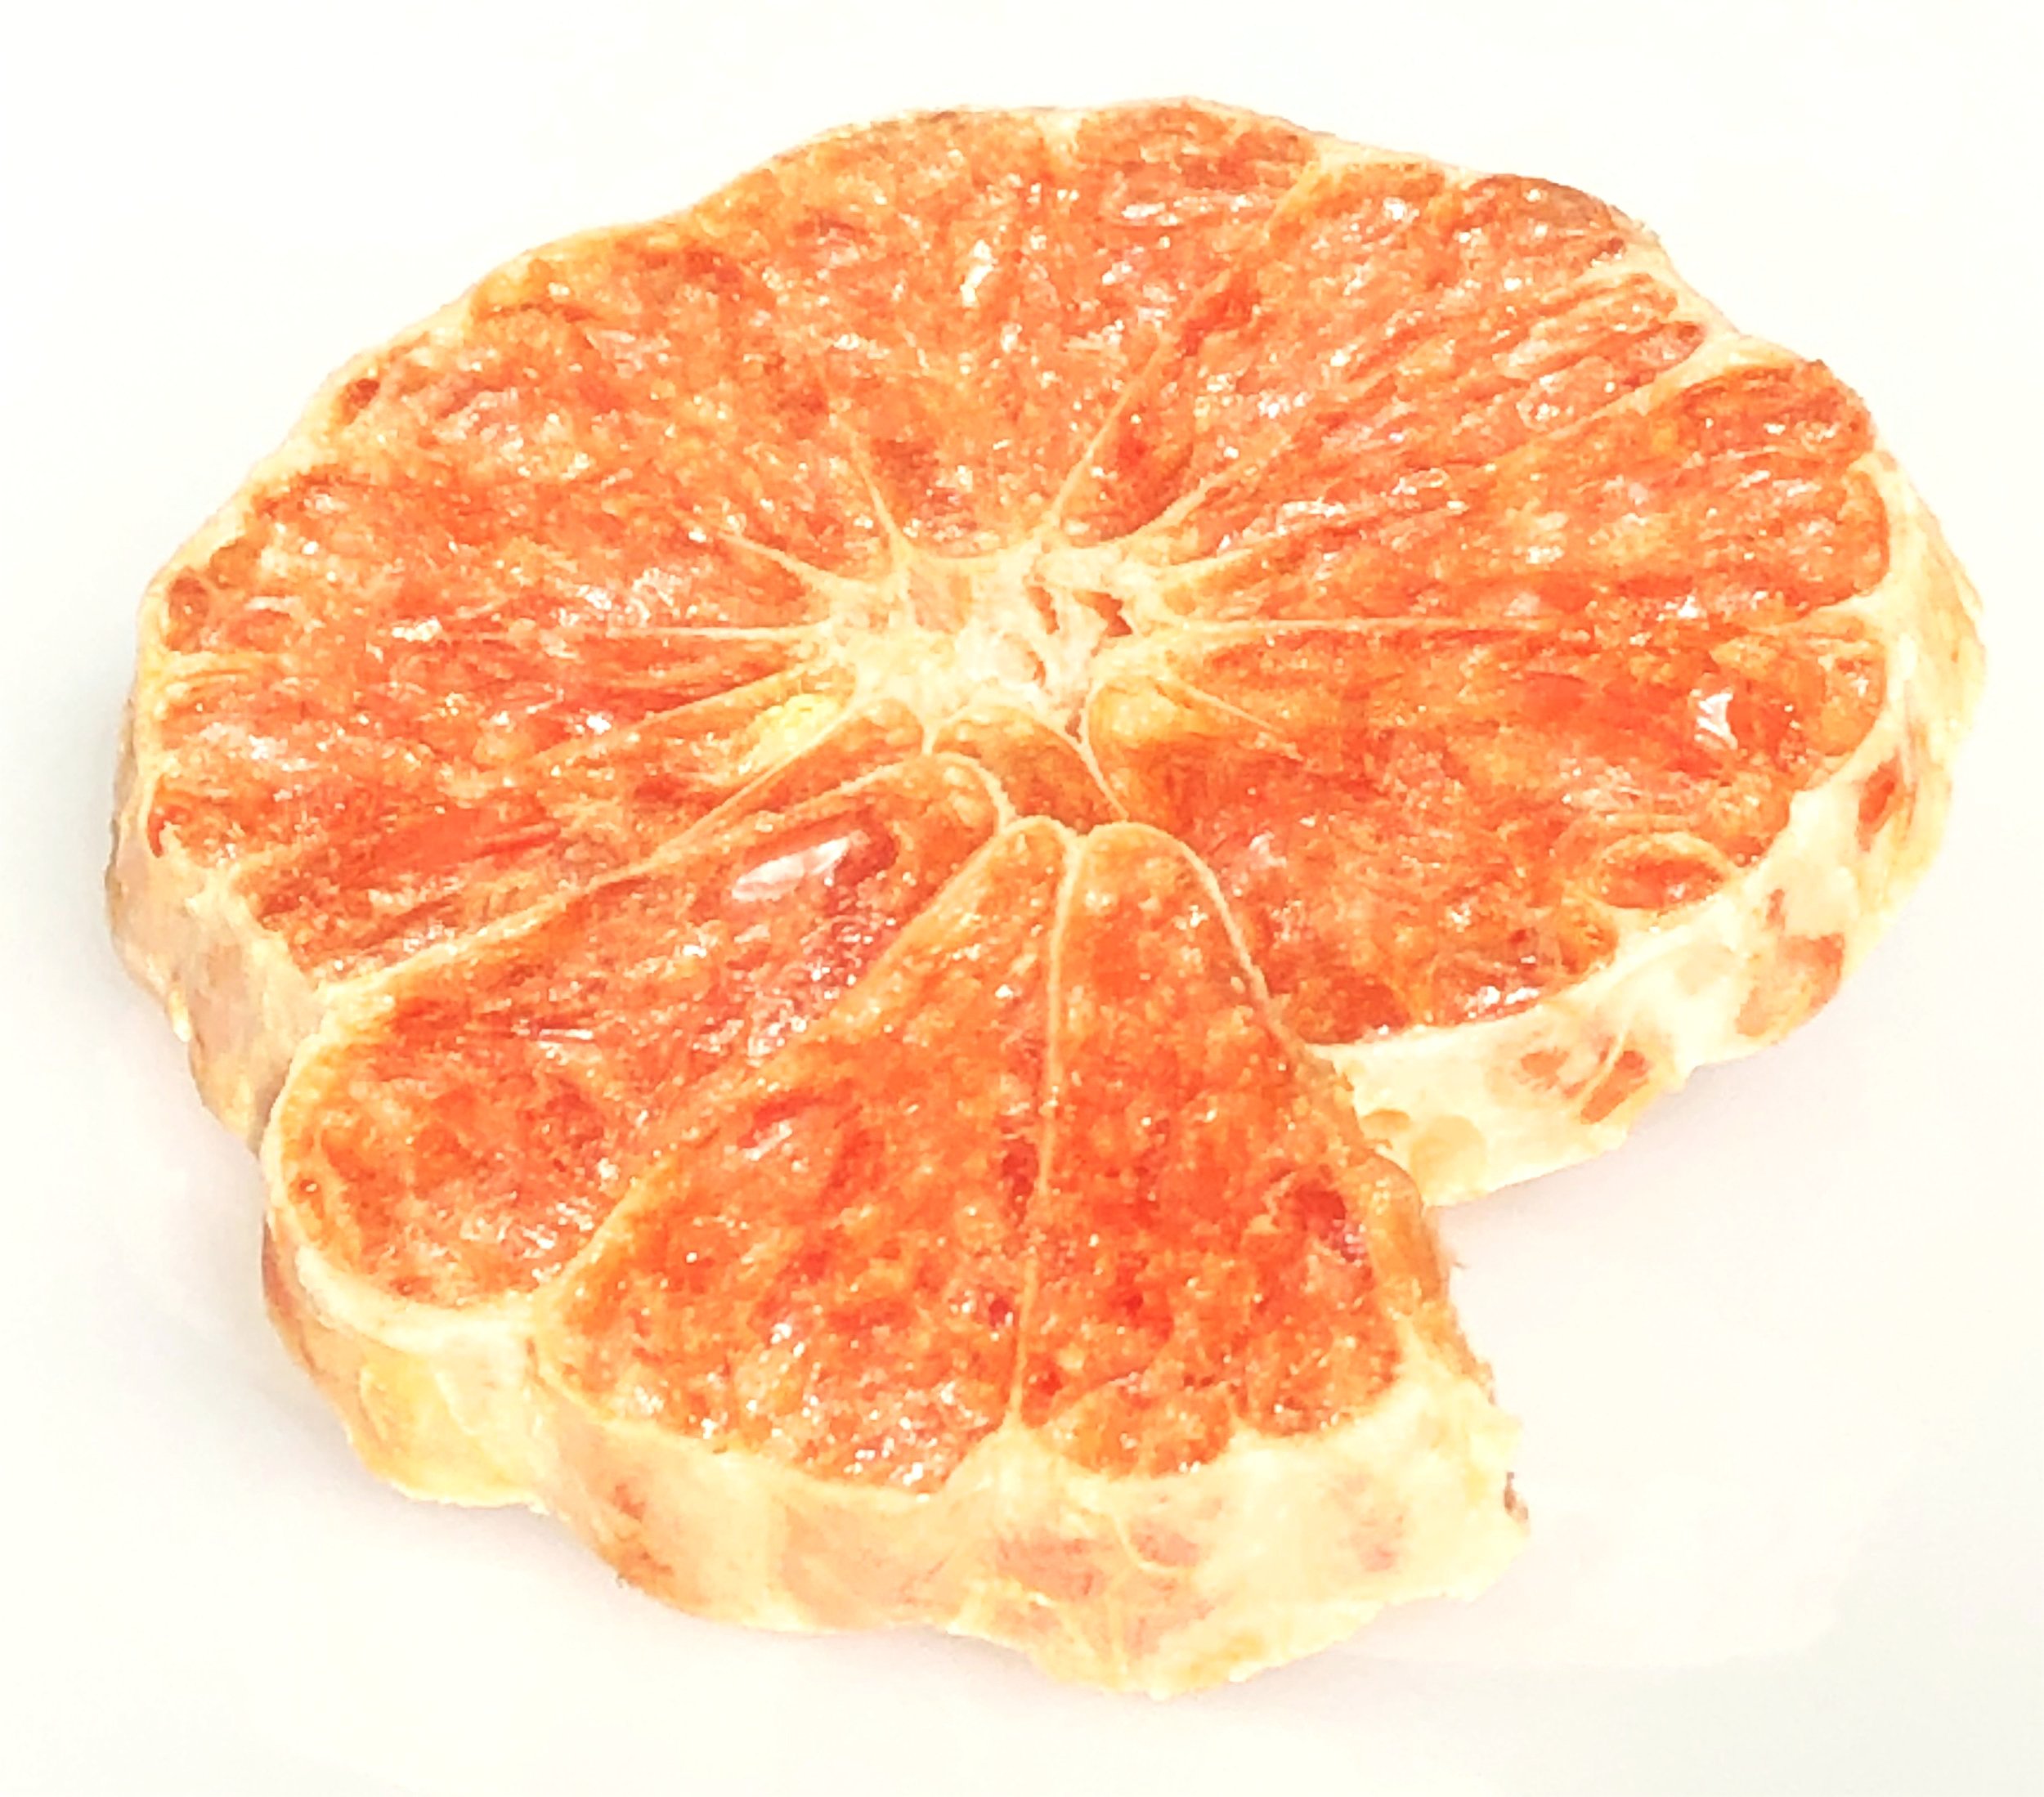 FRZDRY Ruby Red Grapefruit Slice